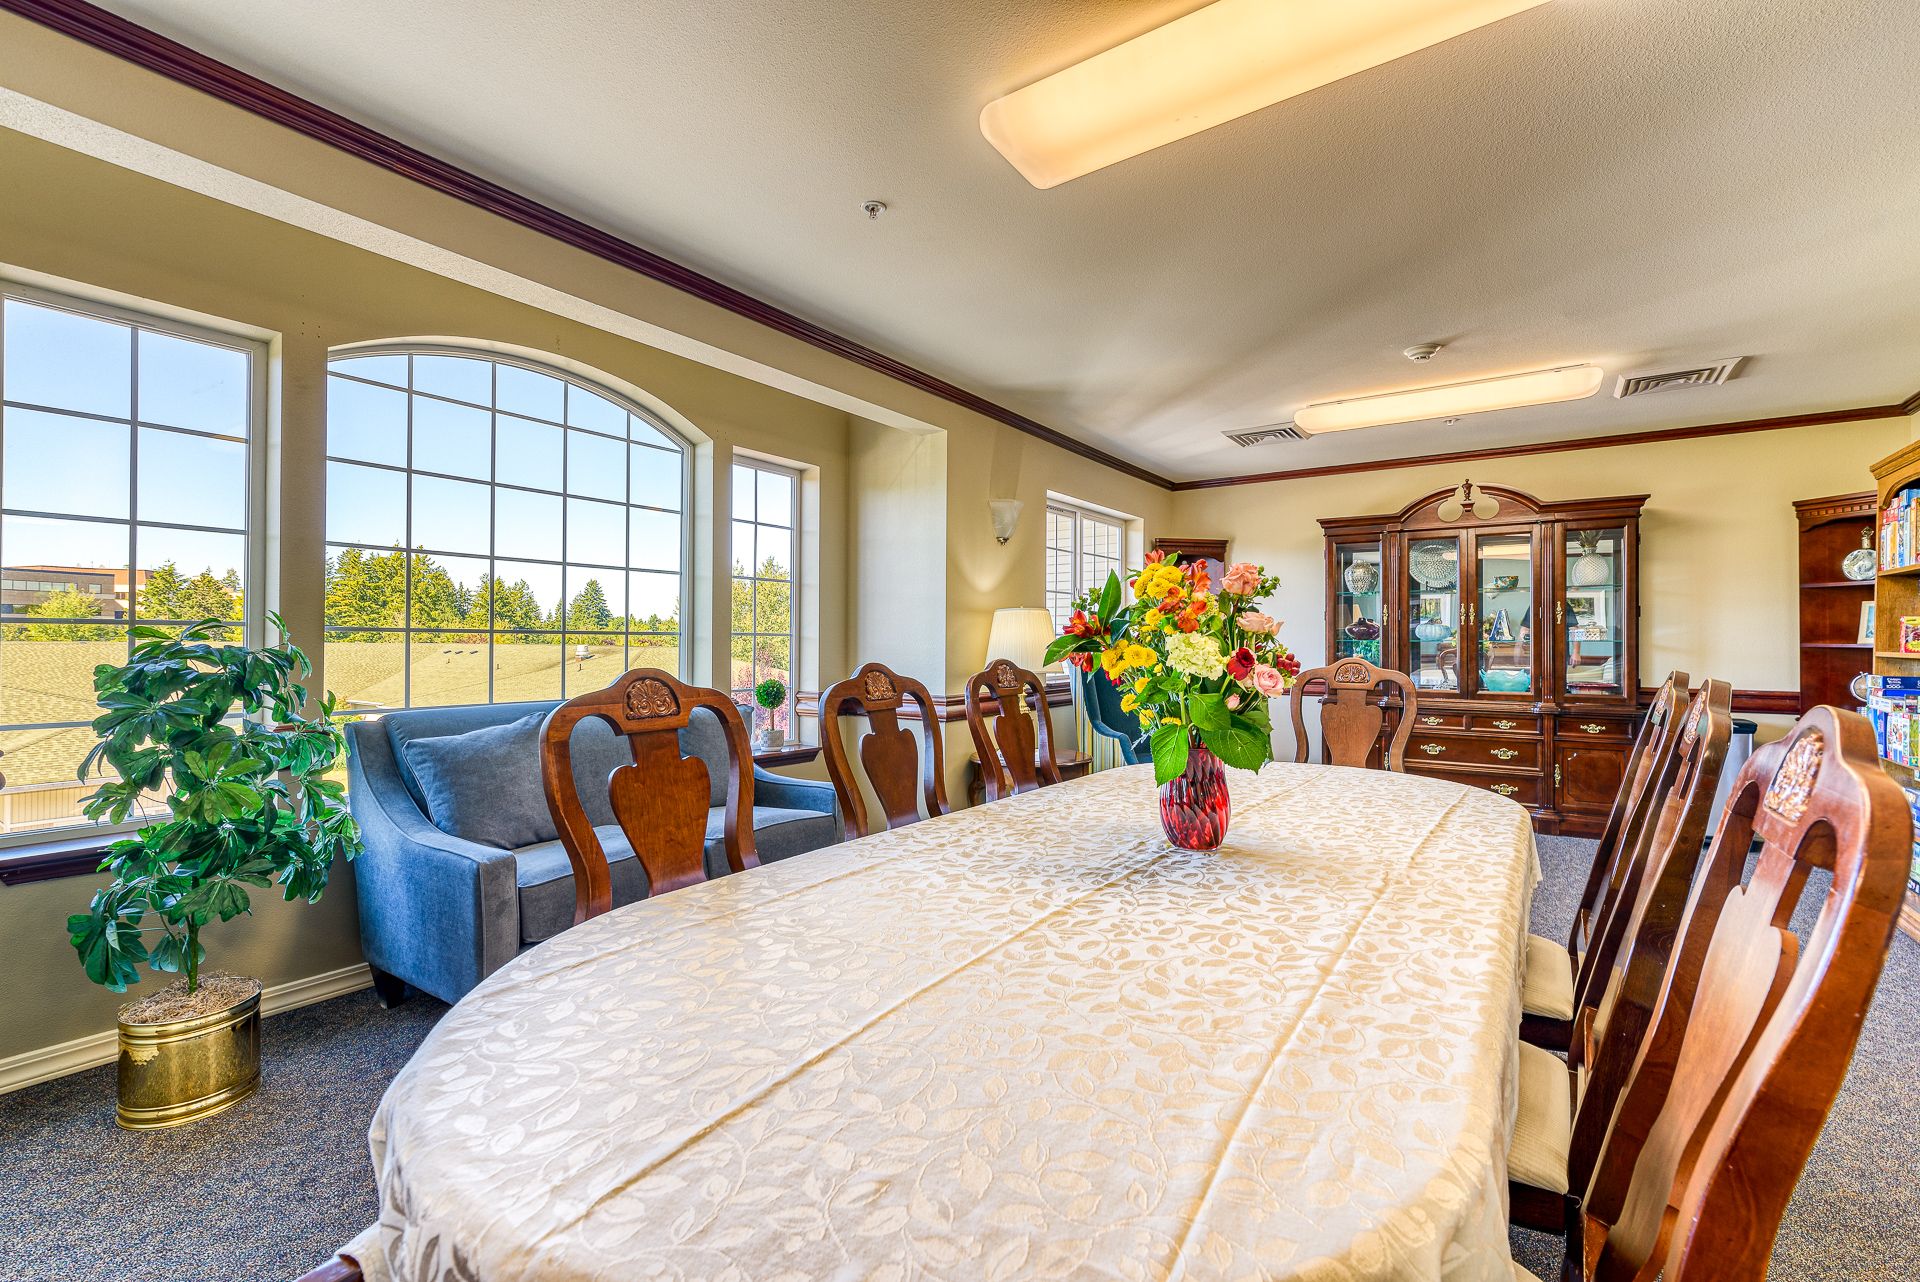 Artesian Place Assisted Living 5